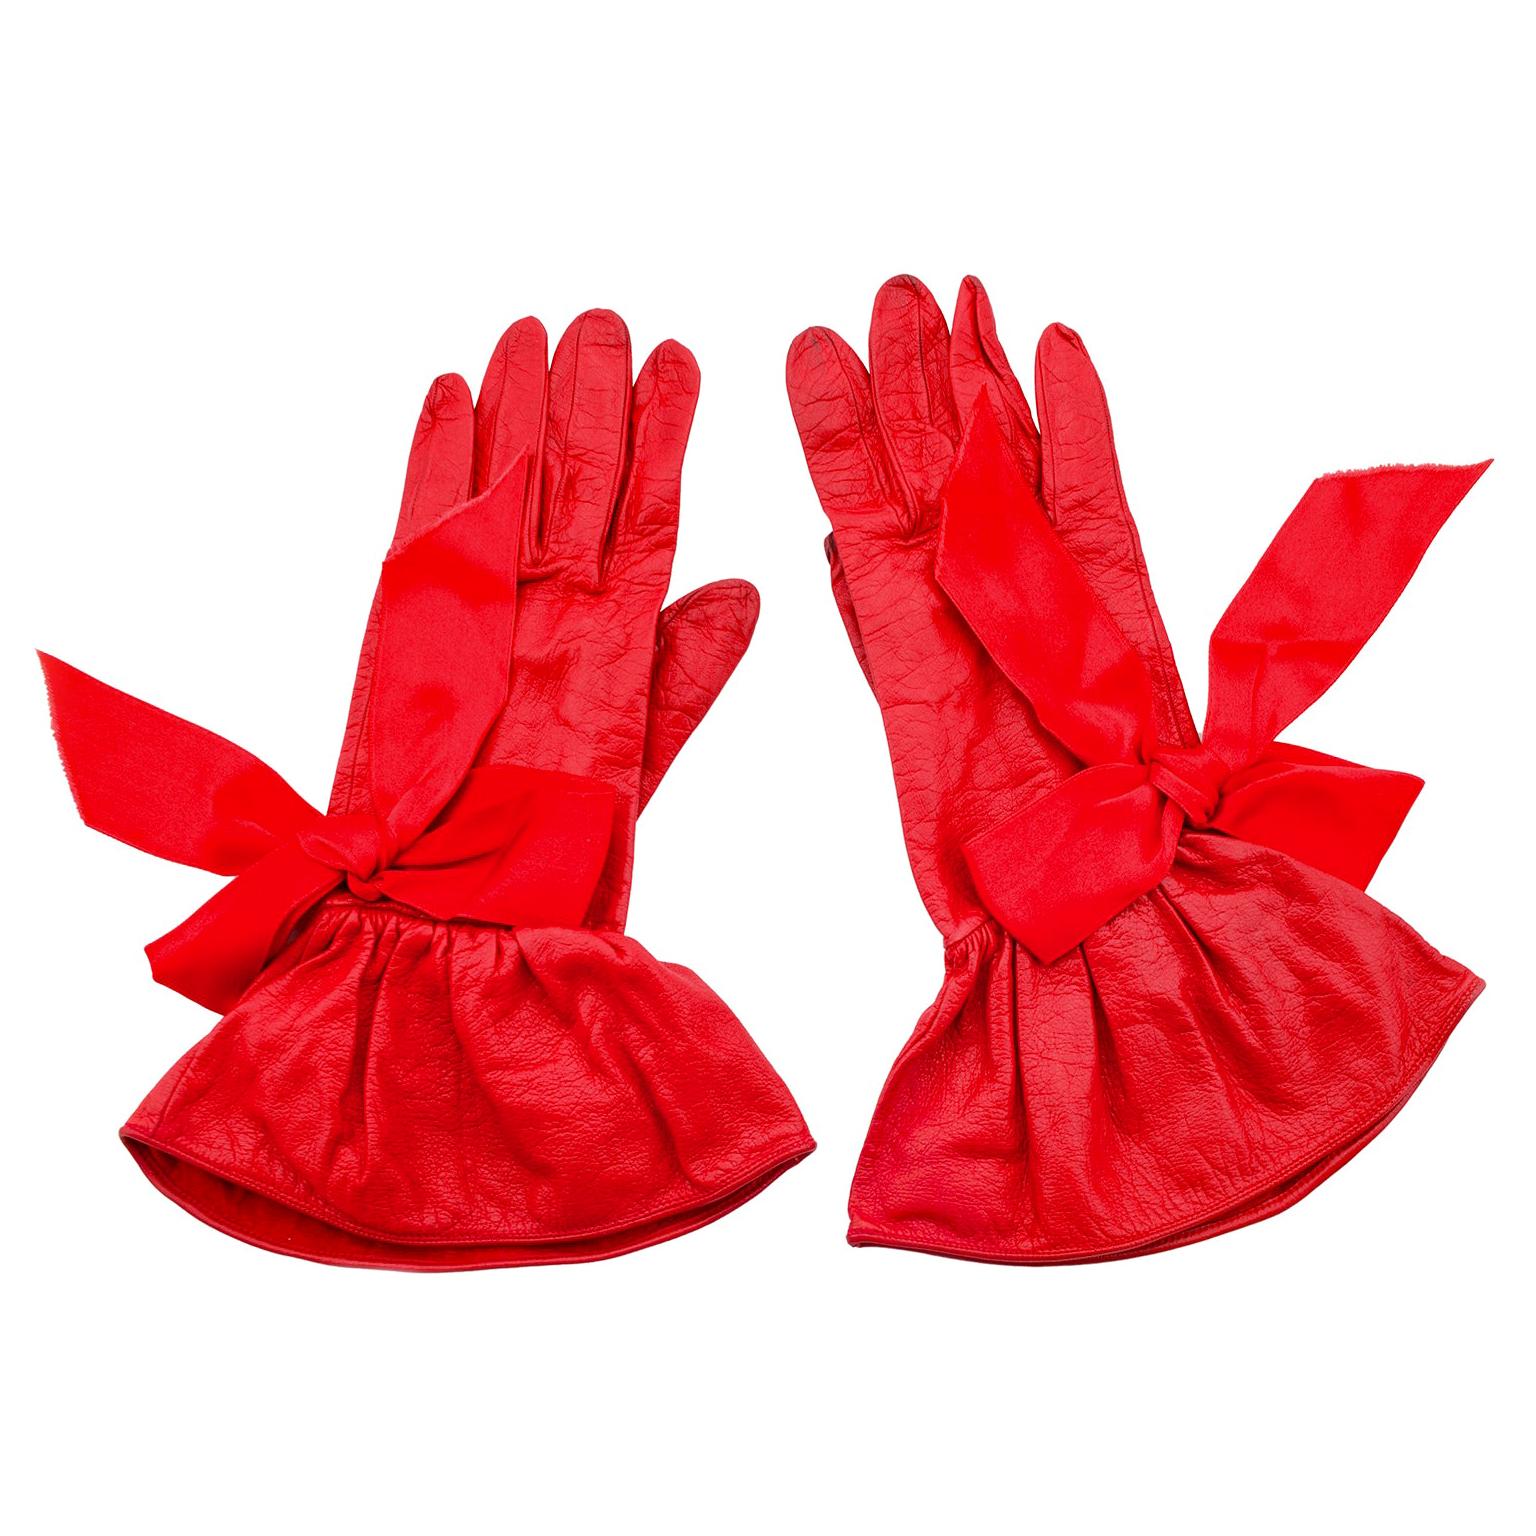 1990s Christian Dior Red Leather Gloves with Satin Bows 